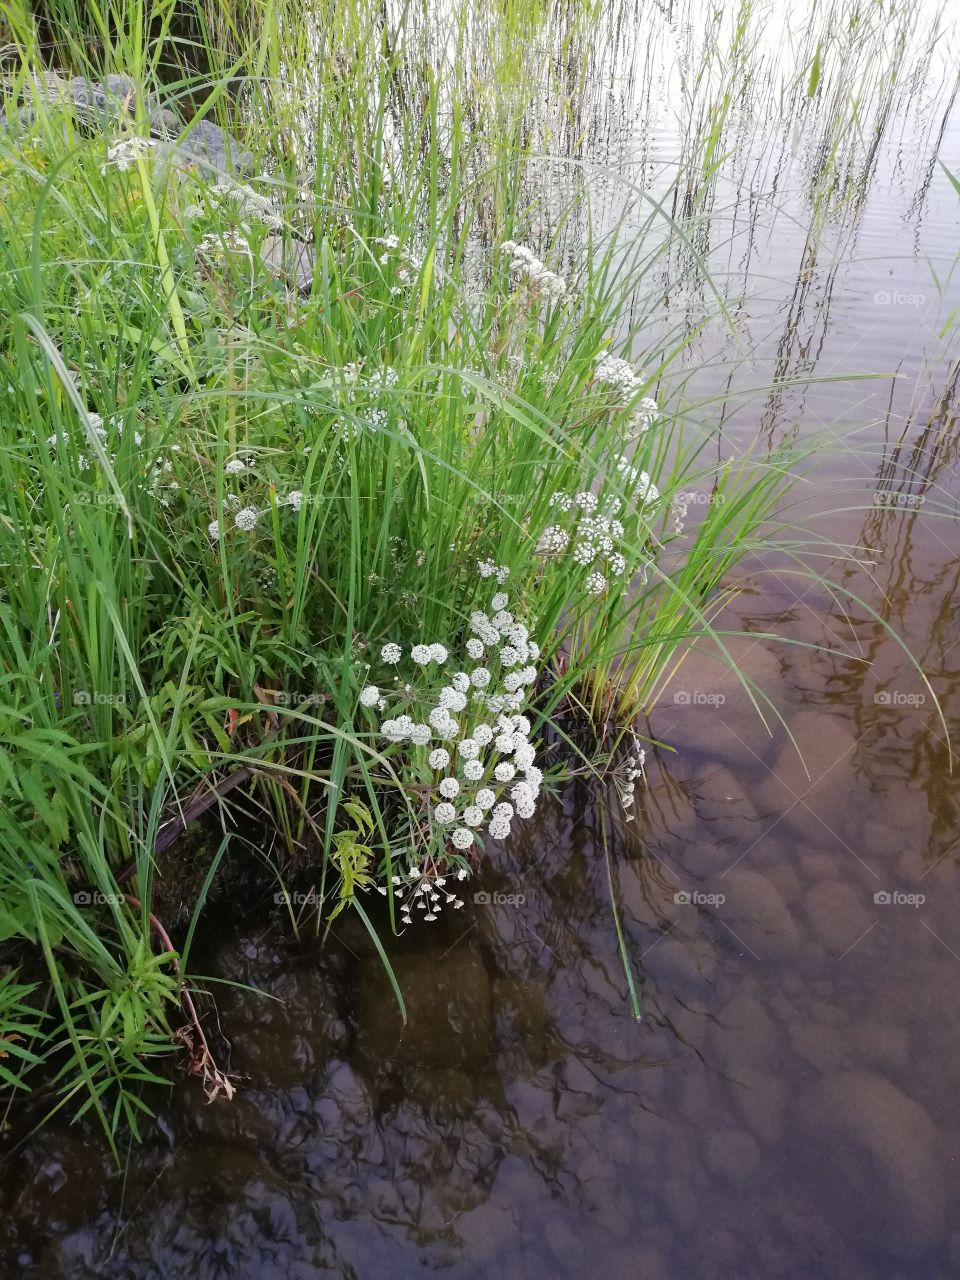 Beautiful white flowers are blooming on the bank of the lake. In the front under the water are plenty of slimy stones. The surface of the water ripples a little bit among the green plants.